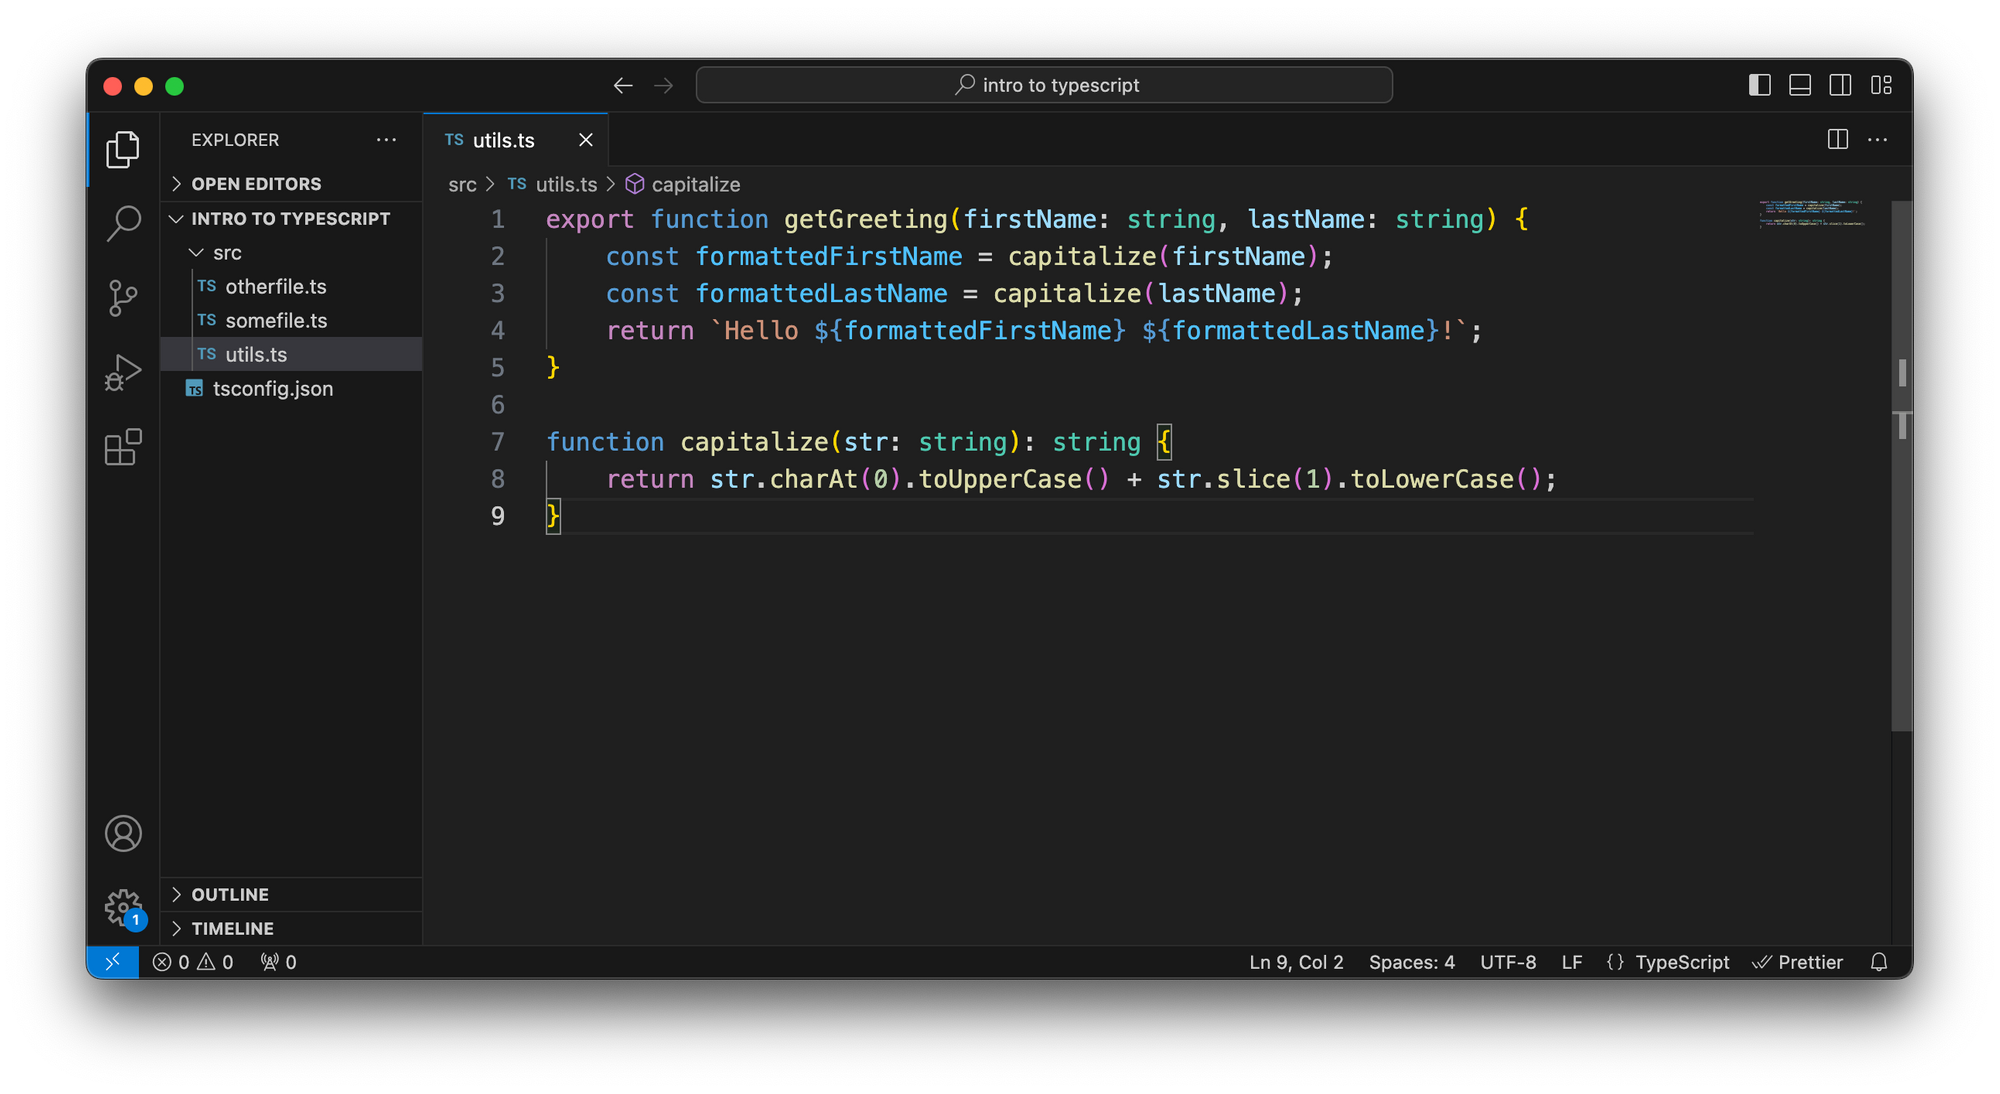 VS Code with a simple TypeScript file. In this file, we define a 'getGreeting' function that receives two arguments, a first name, and a last name. The type of both of these arguments is a string.